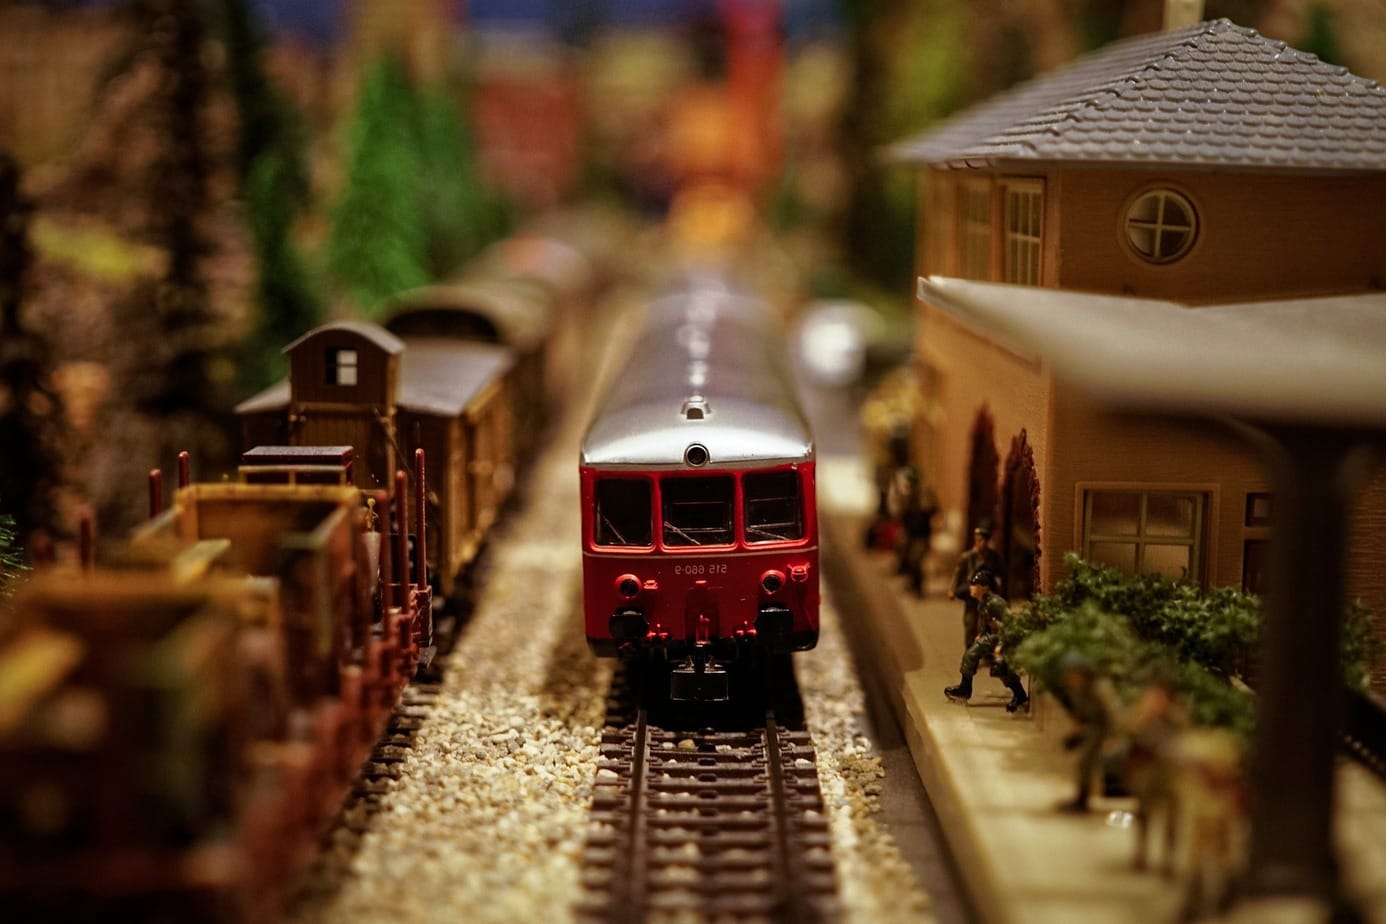 Model railroading – what does it take to build your own model railroad?